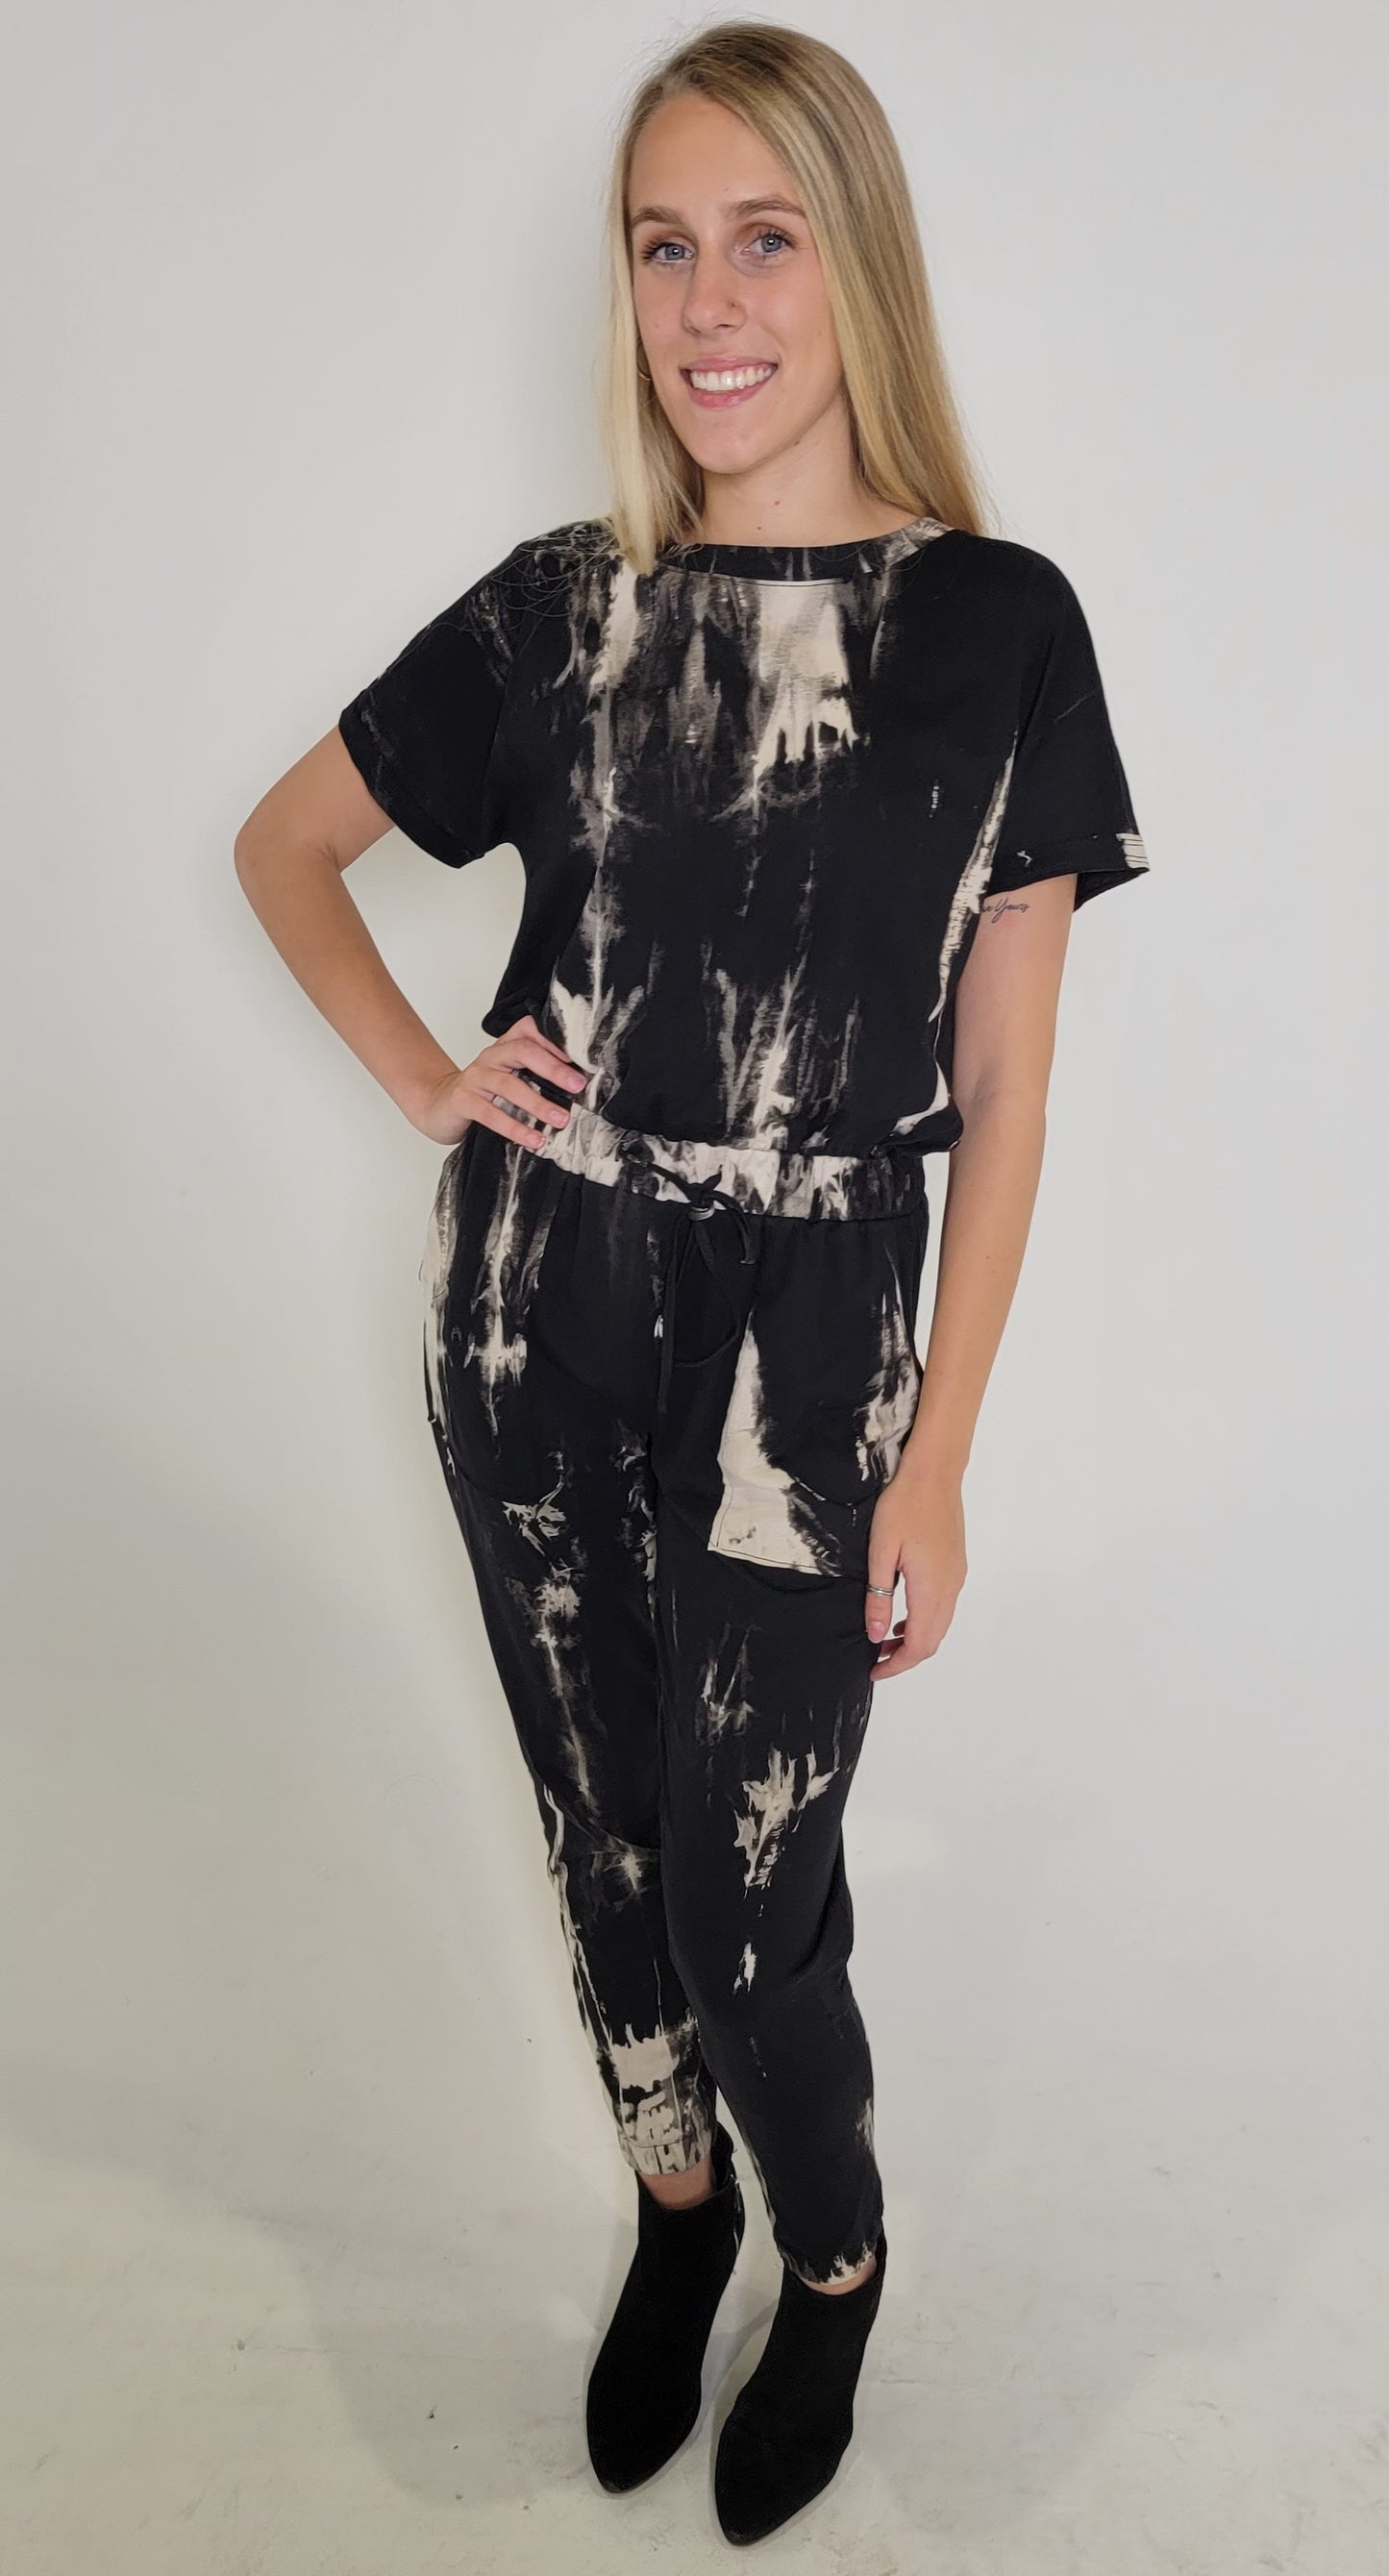 Take Me Out Tonight Tie Dye Short Sleeve Jumpsuit